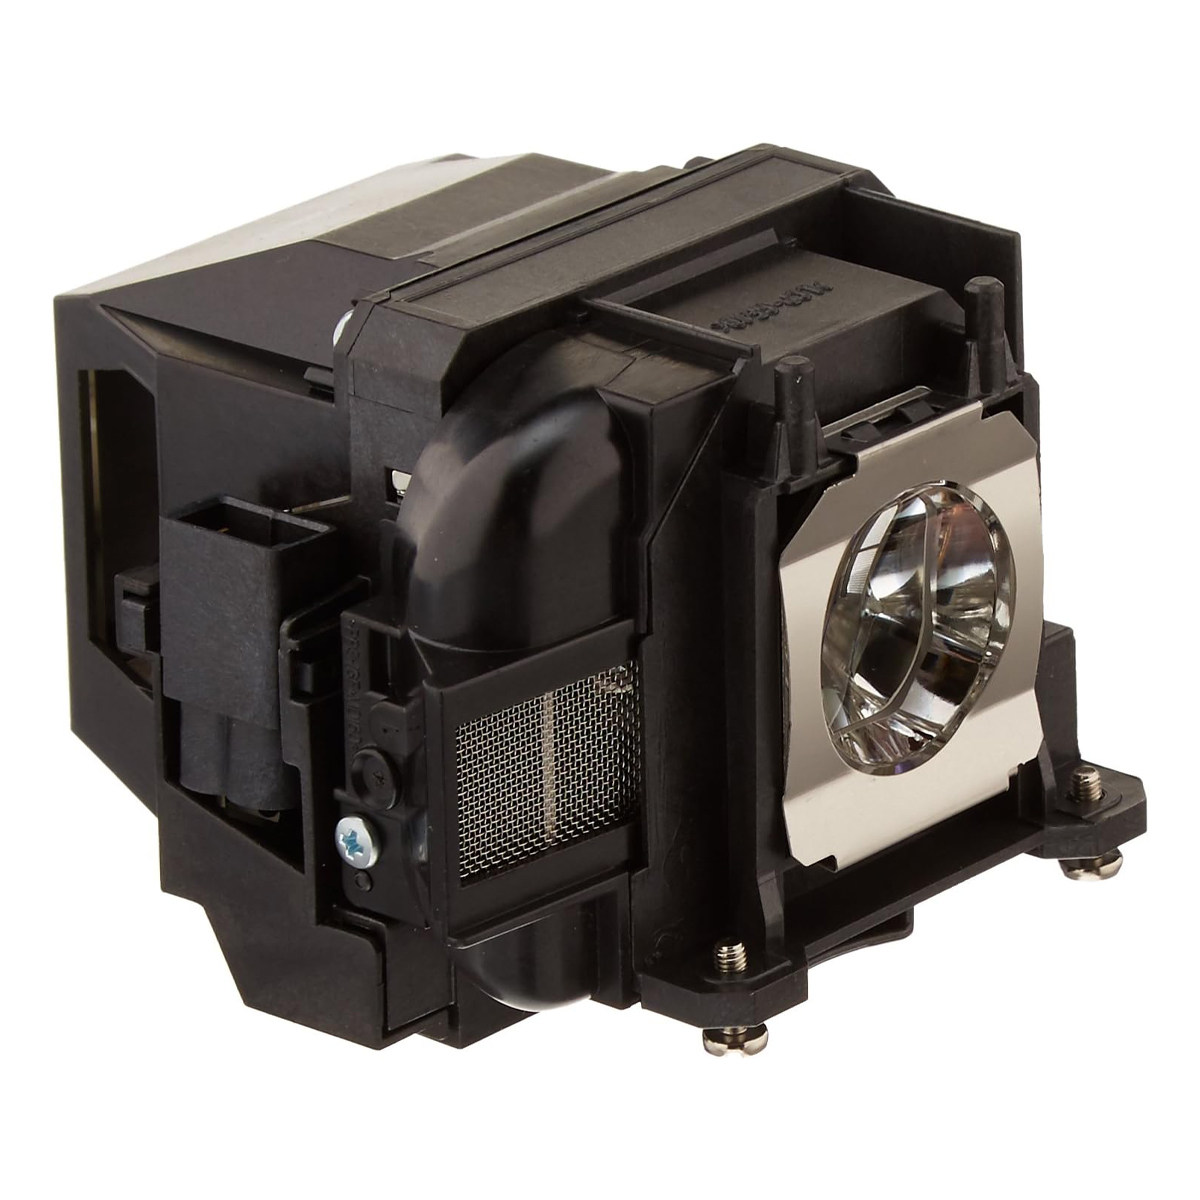 Replacement Projector lamp ELPLP87 For Epson EB-2040 EB-520 EB-525W EB-530